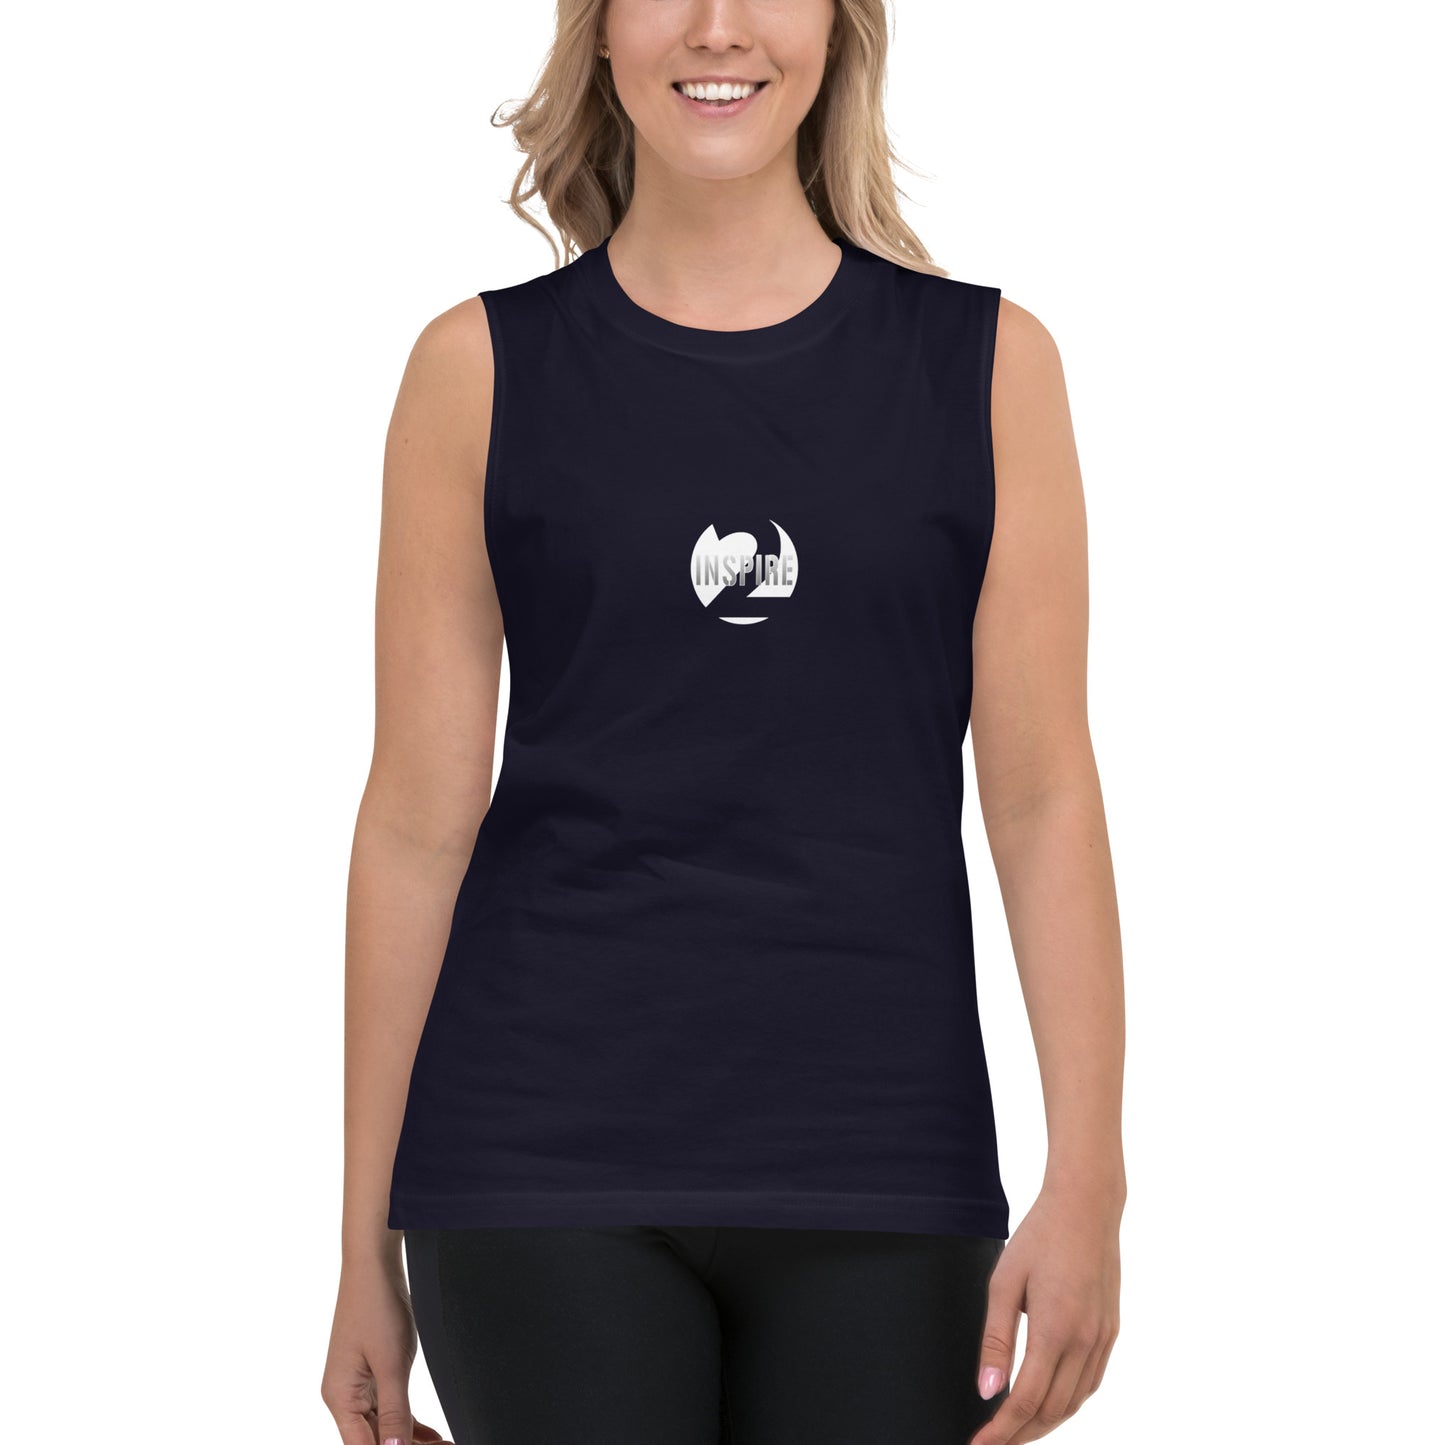 Small White Sphere Muscle Shirt